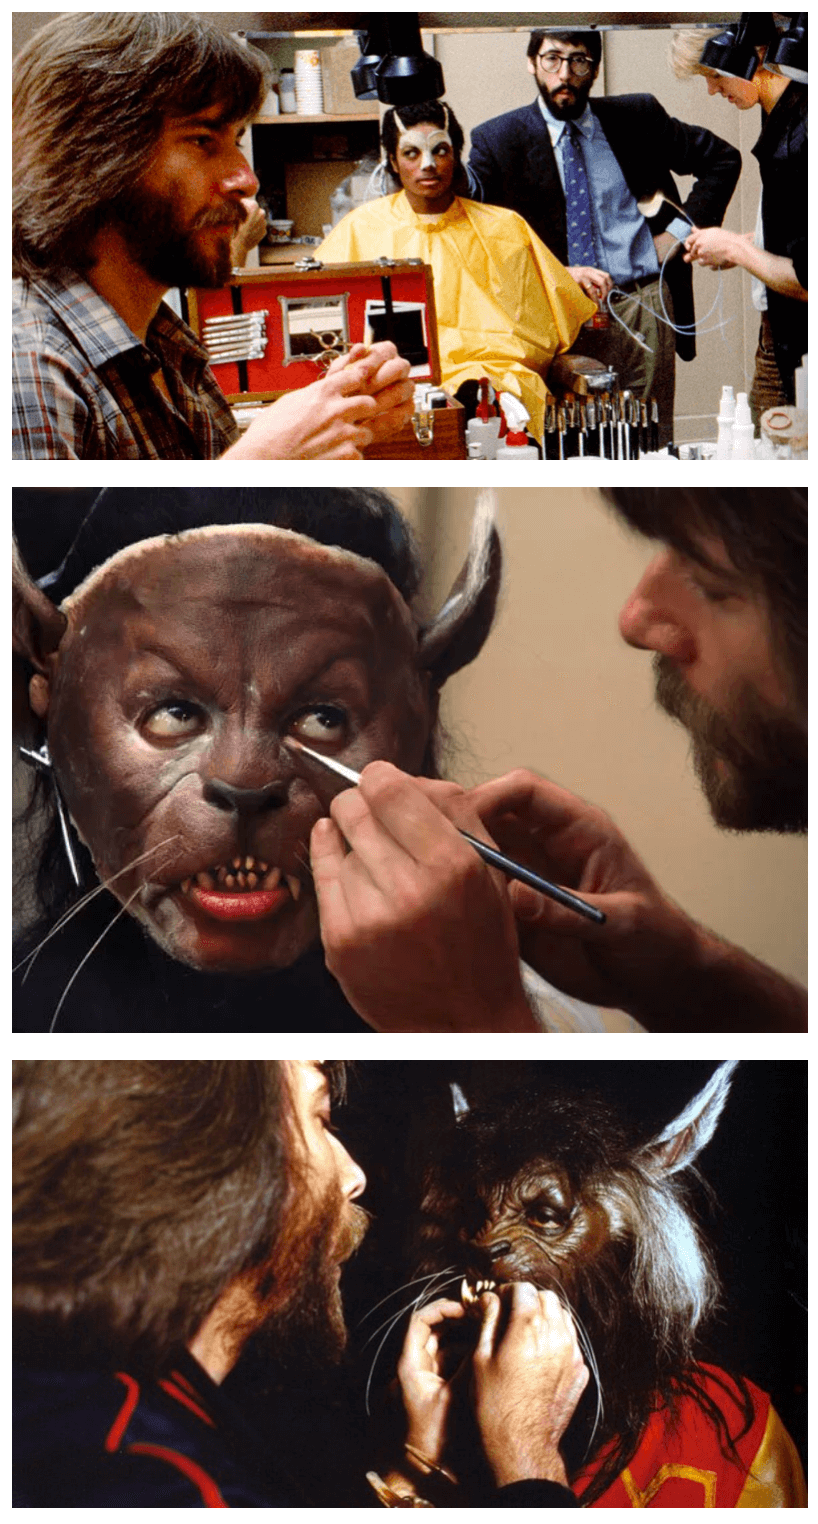 Special FX Makeup - Halloween - Wizard of Oz/Monkey King/Planet of the Apes  - Foam Latex Monkey Prosthetic